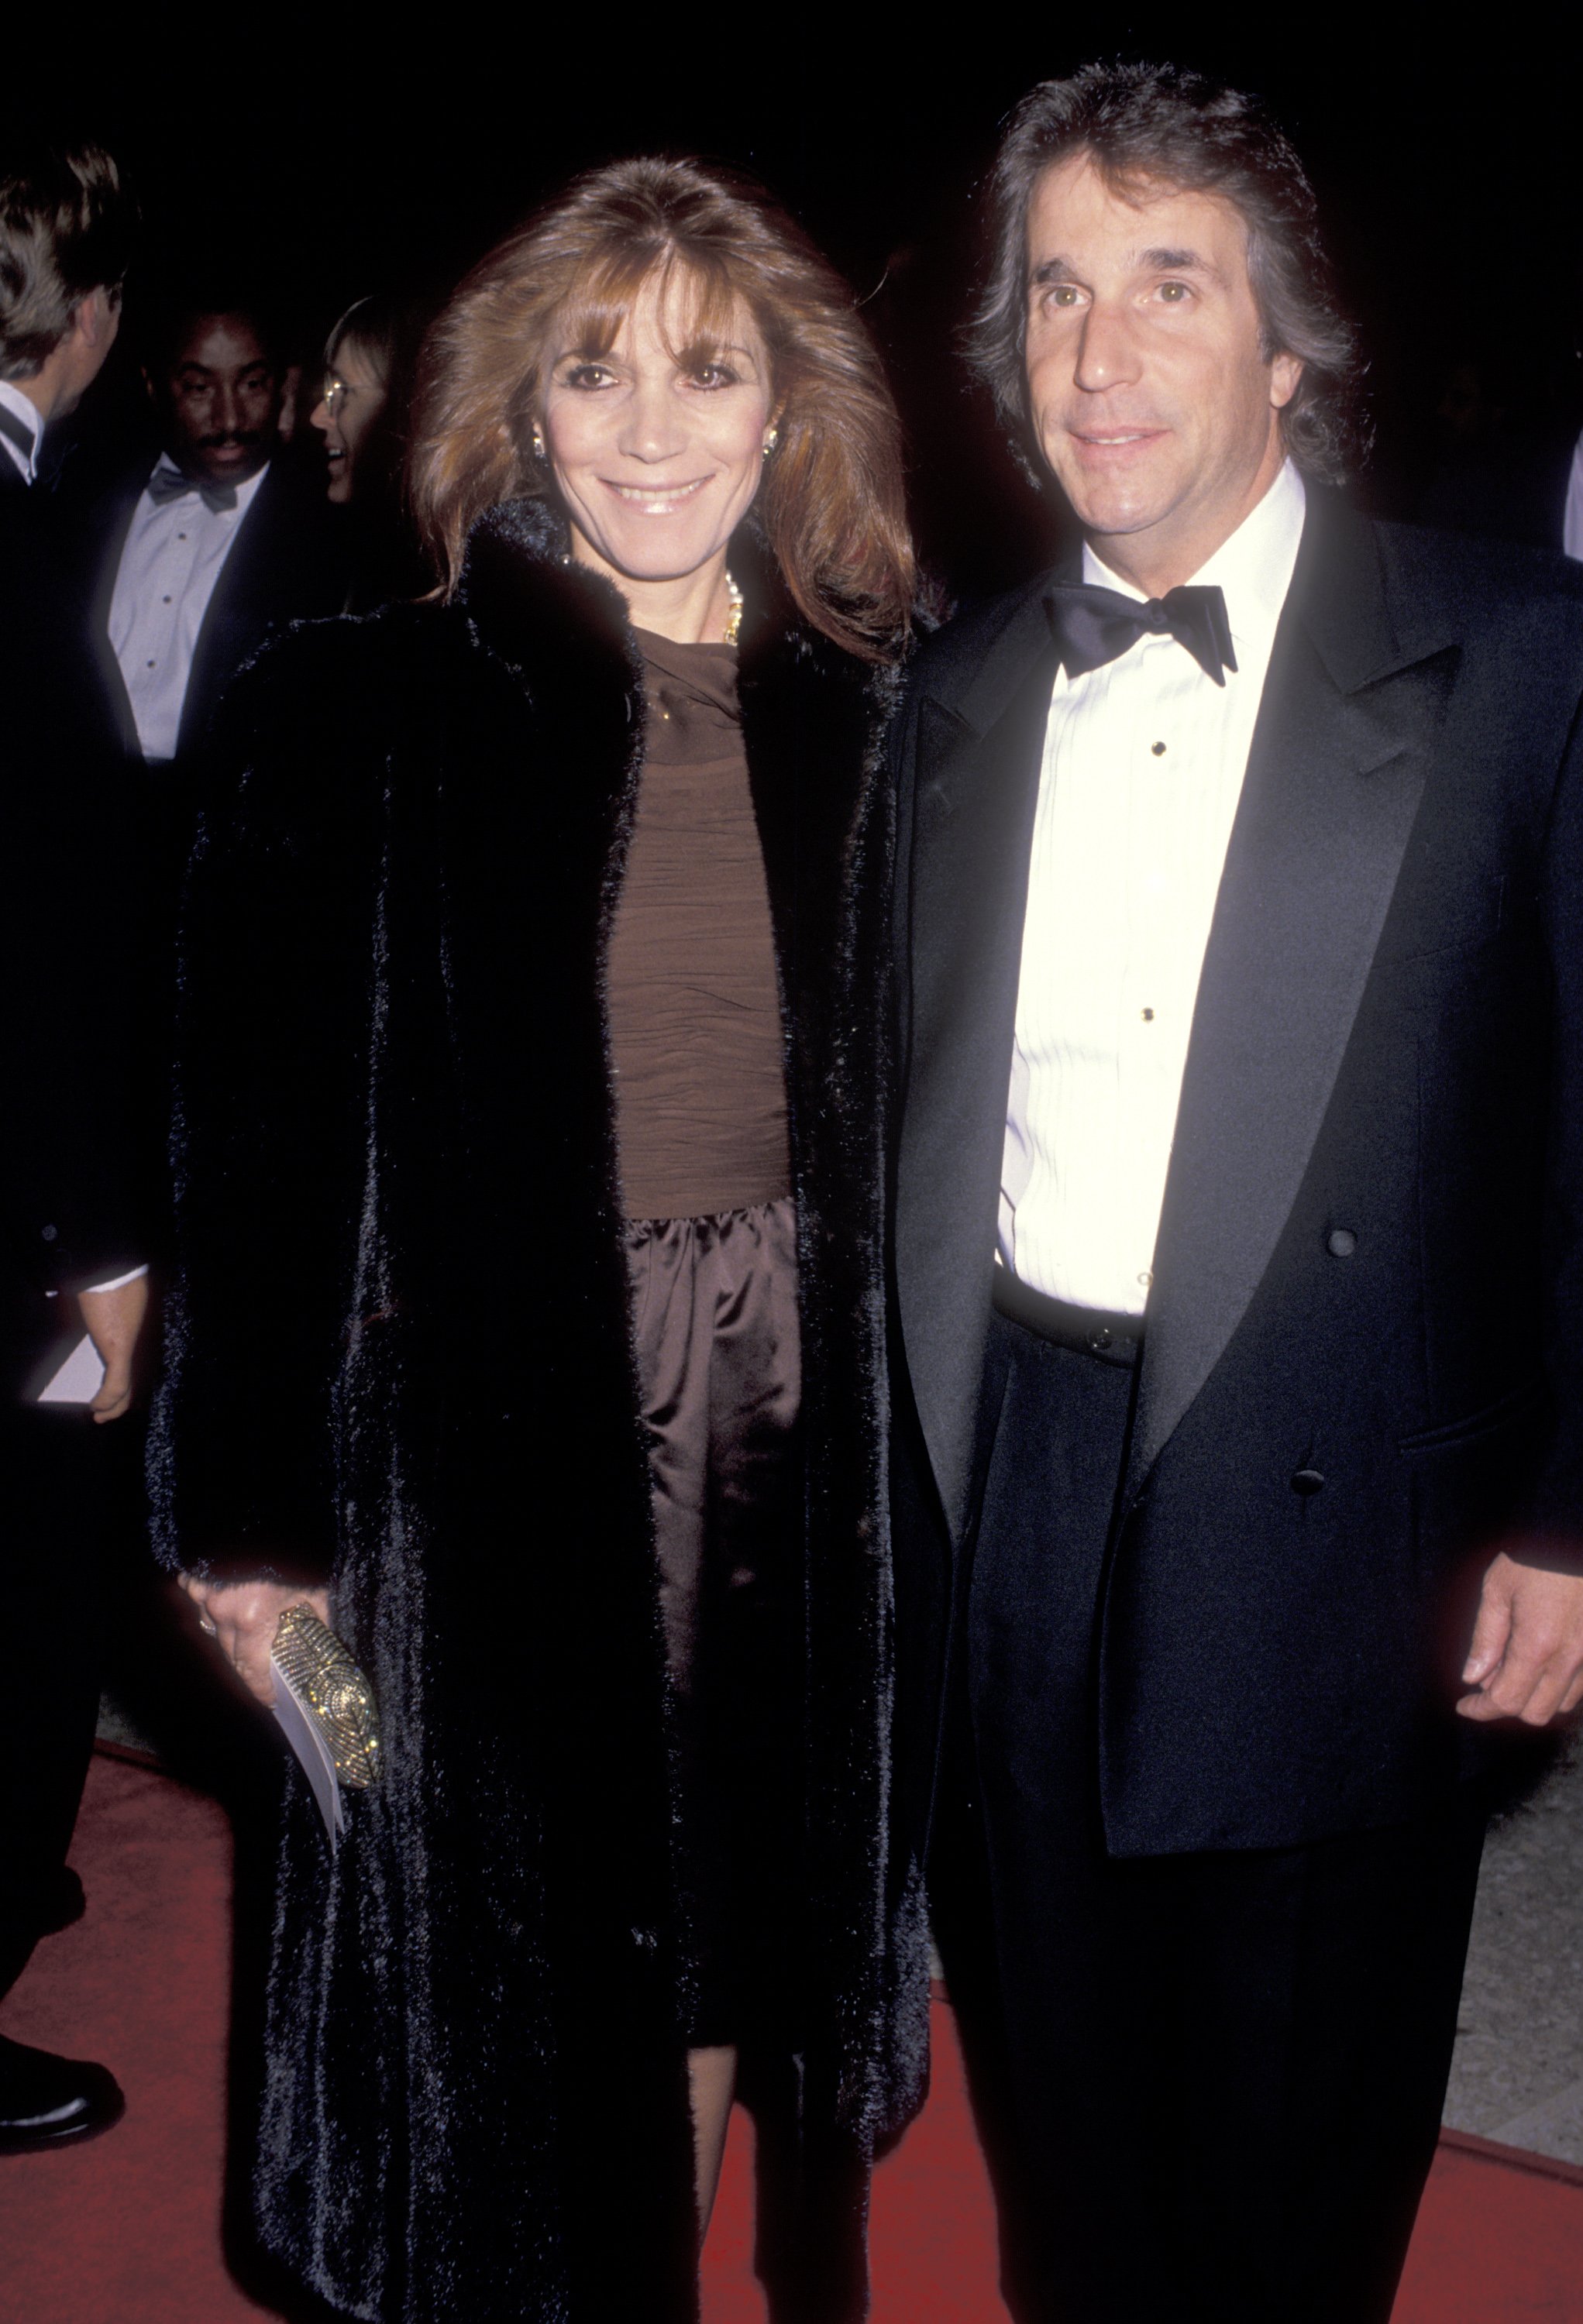 Henry Winkler and wife Stacey attend the "Family Business" Century City Premiere on December 13, 1989 at Cineplex Odeon Century Plaza Cinemas in Century City, California | Source: Getty Images 